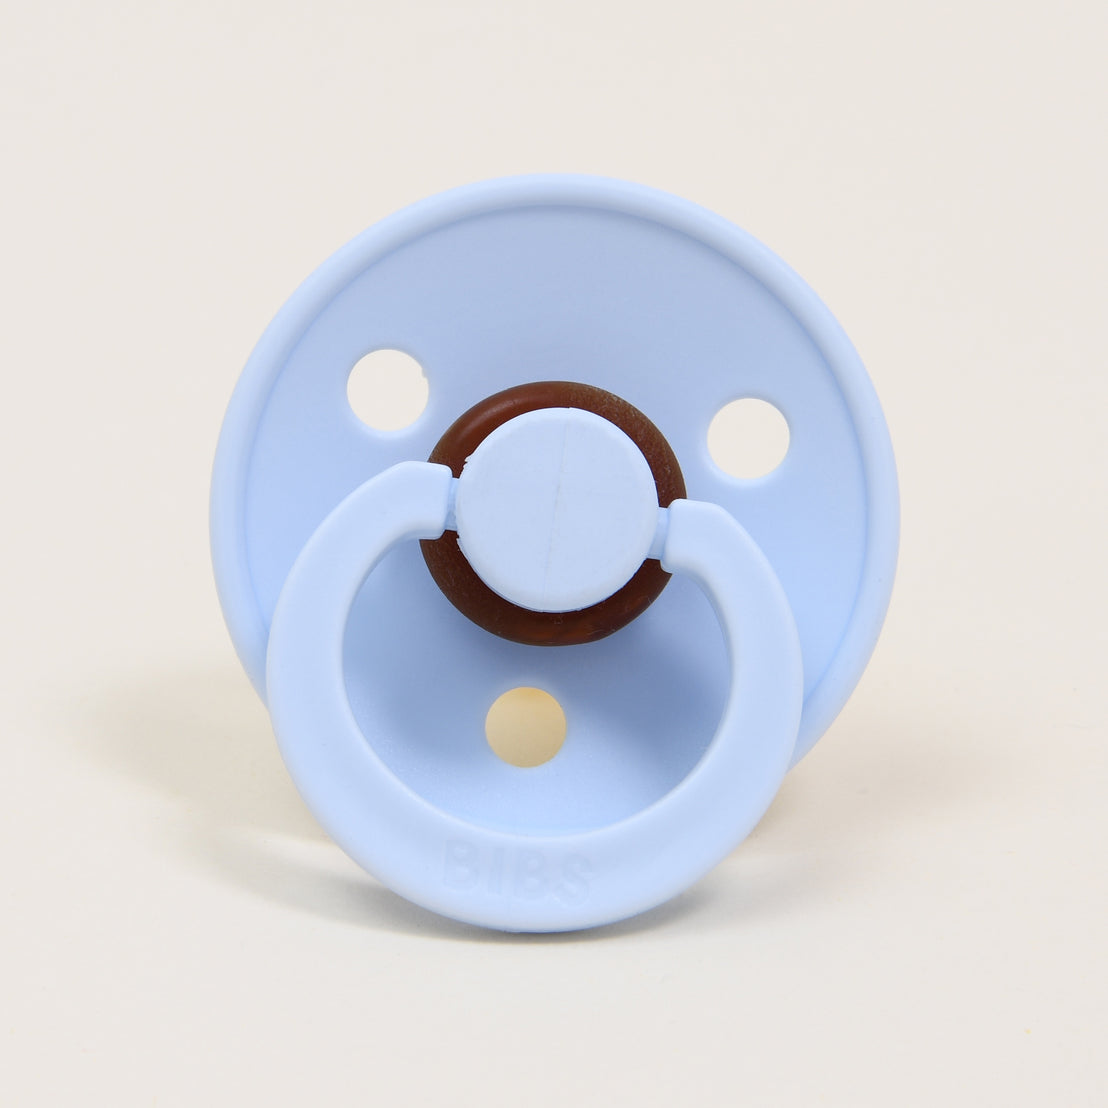 Austin Pacifier Set in Baby Blue baby pacifier with a circular handle and brown button detail, perfect for a boutique coming home gift.